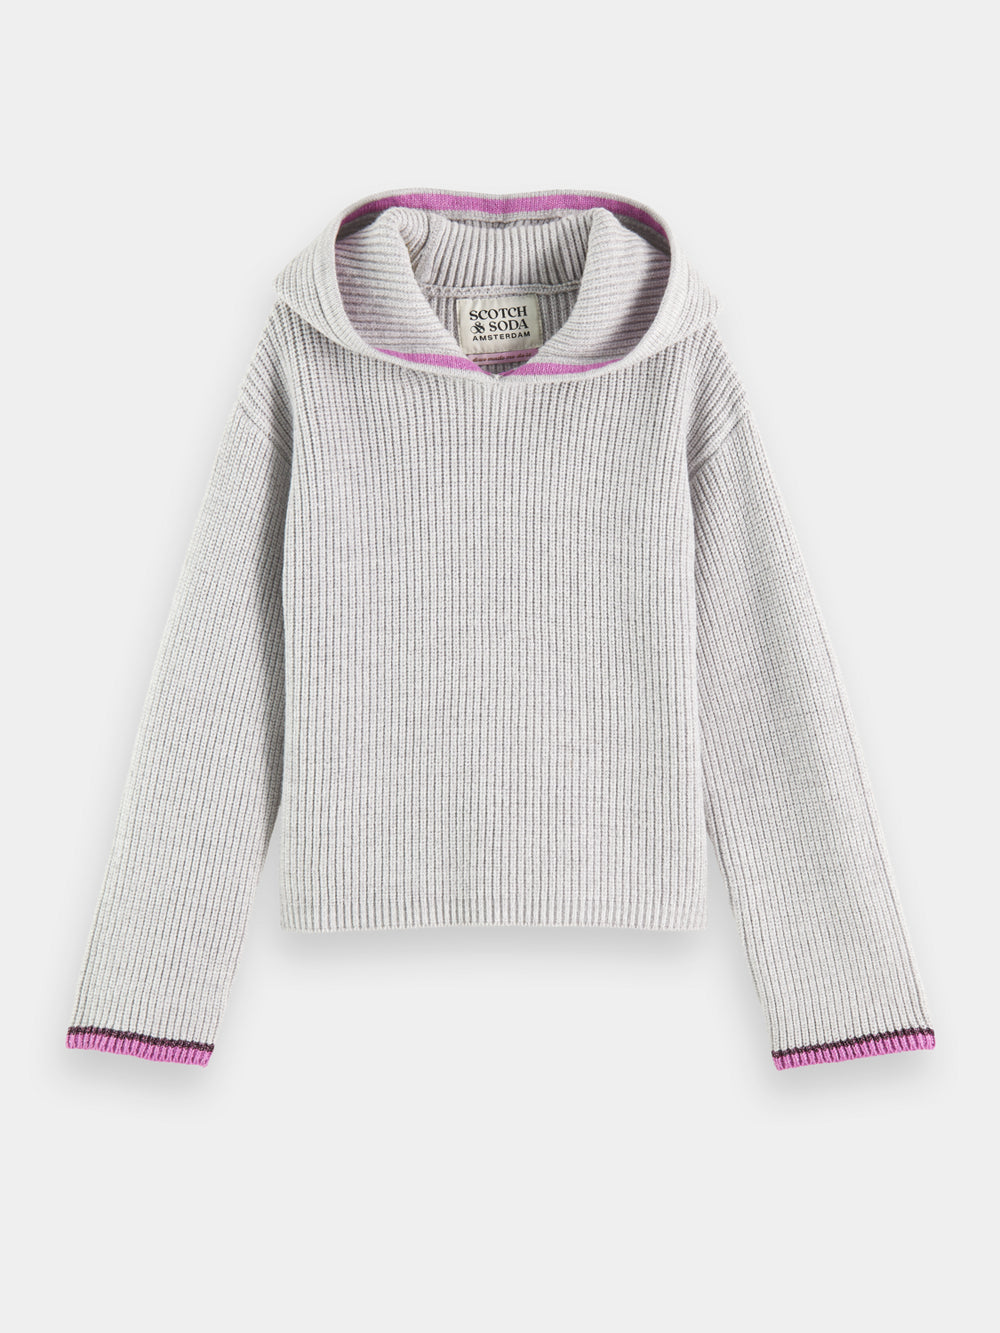 Kids - Hooded tipping detail pullover - Scotch & Soda AU